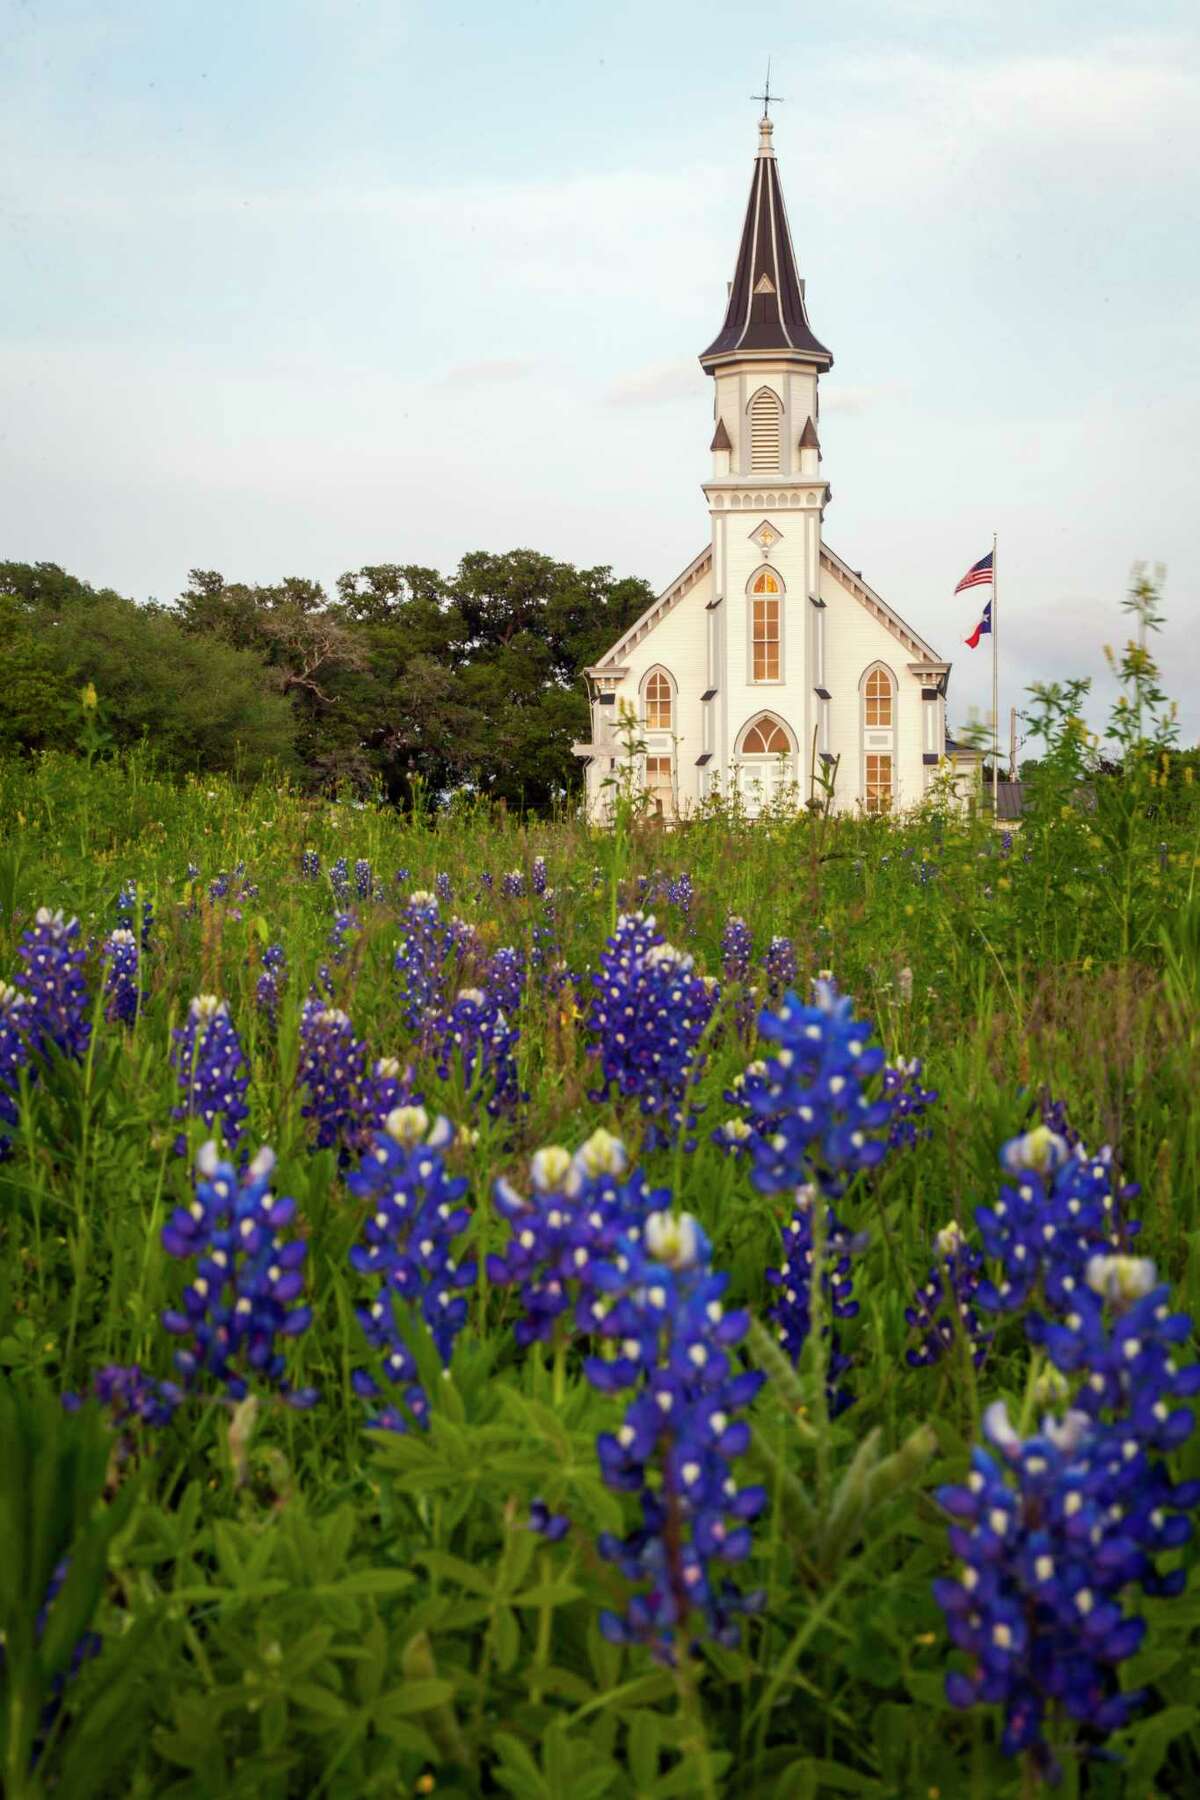 Sts. Cyril and Methodius Church rises over a field of bluebonnets on Thursday, March 29, 2012, in Dubina, Texas. ( Smiley N. Pool / Houston Chronicle )